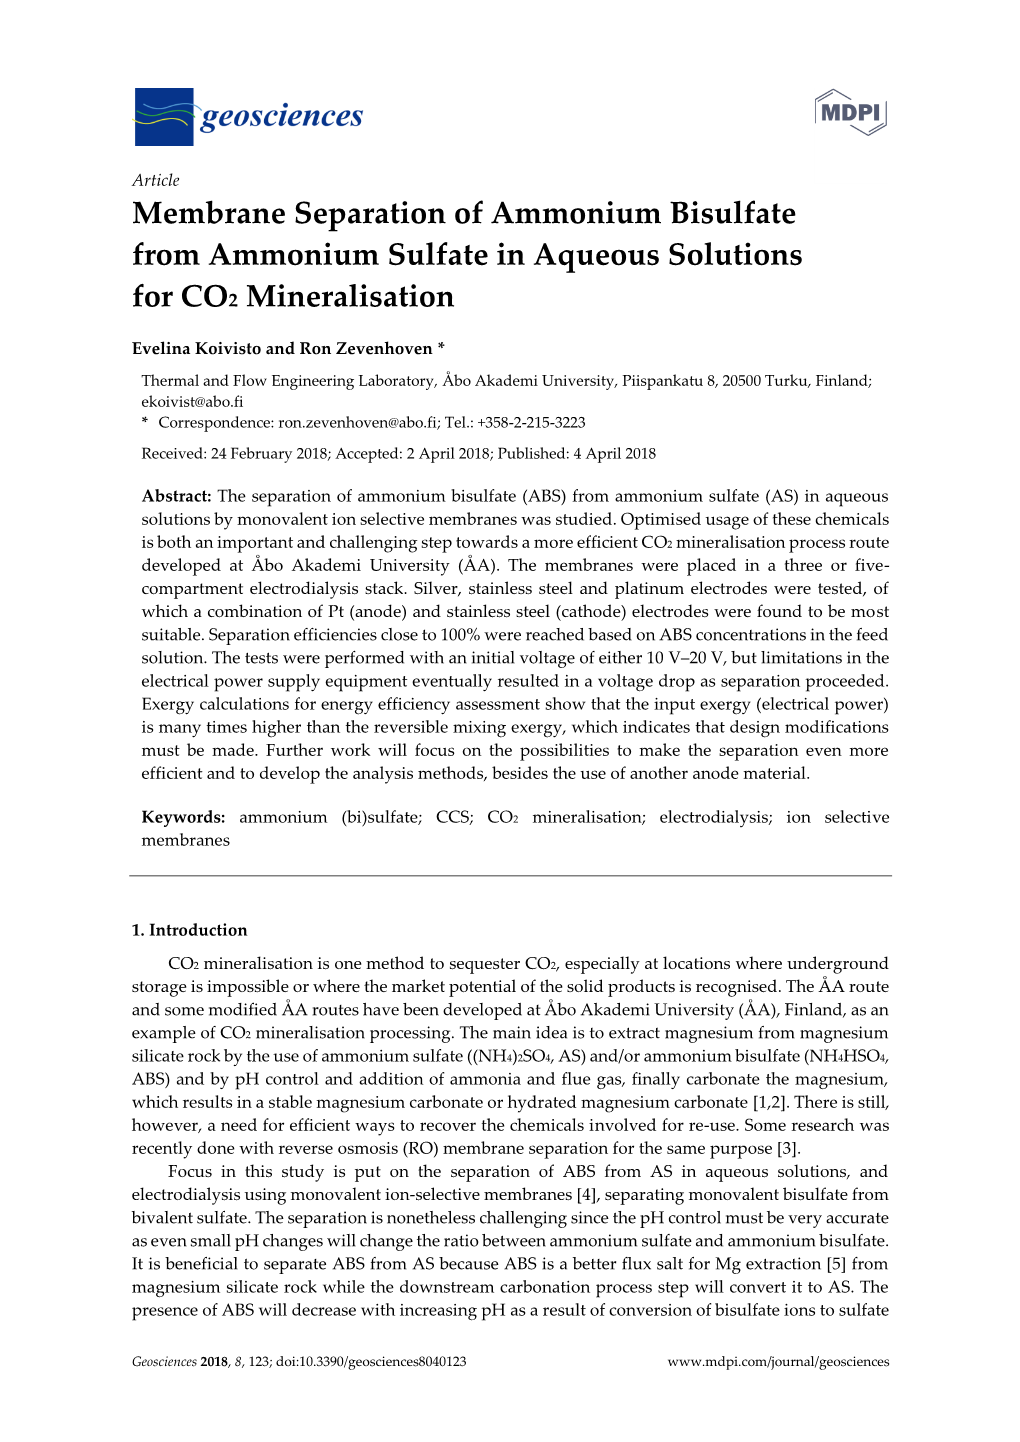 Membrane Separation of Ammonium Bisulfate from Ammonium Sulfate in Aqueous Solutions for CO2 Mineralisation